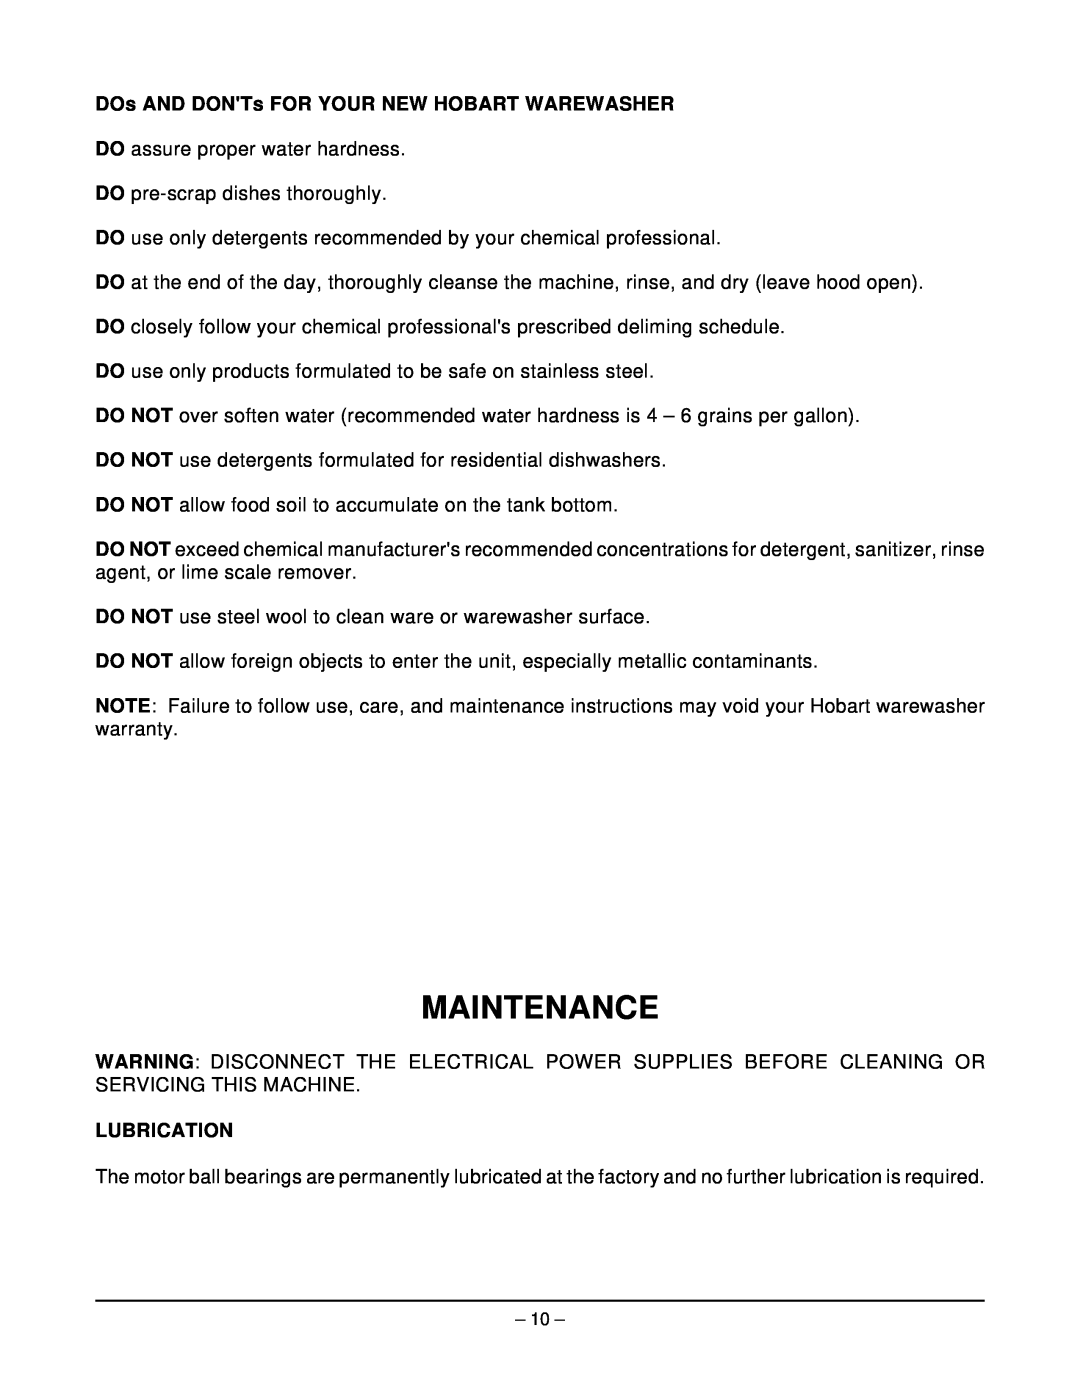 Hobart SM6T2 ML-110857 manual Maintenance, DOs AND DONTs FOR YOUR NEW HOBART WAREWASHER, Lubrication 